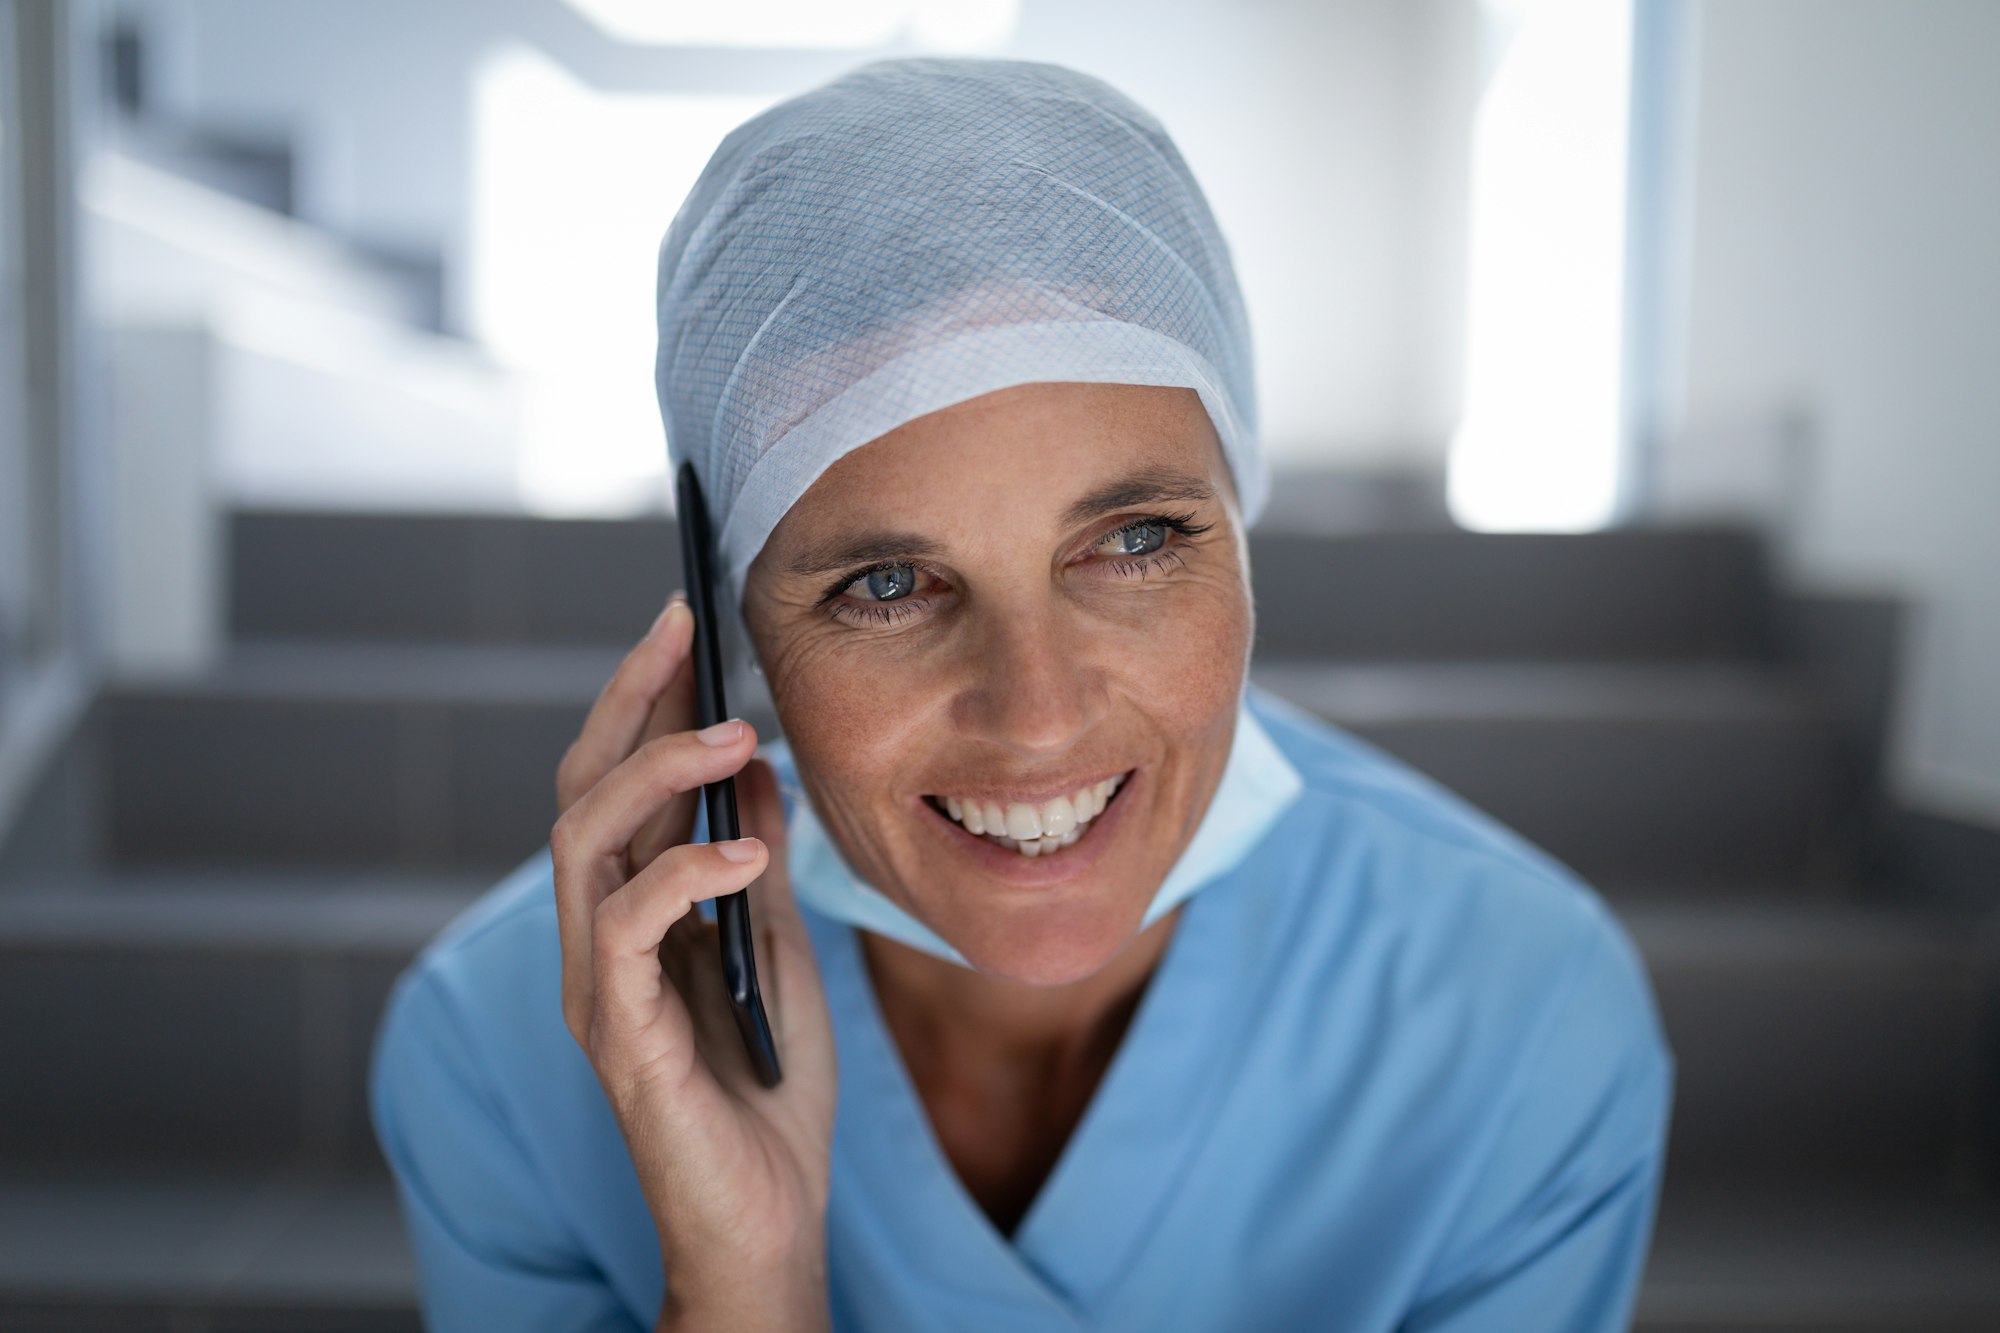 Female surgeon smiling and talking on mobile phone while sitting on hospital stair